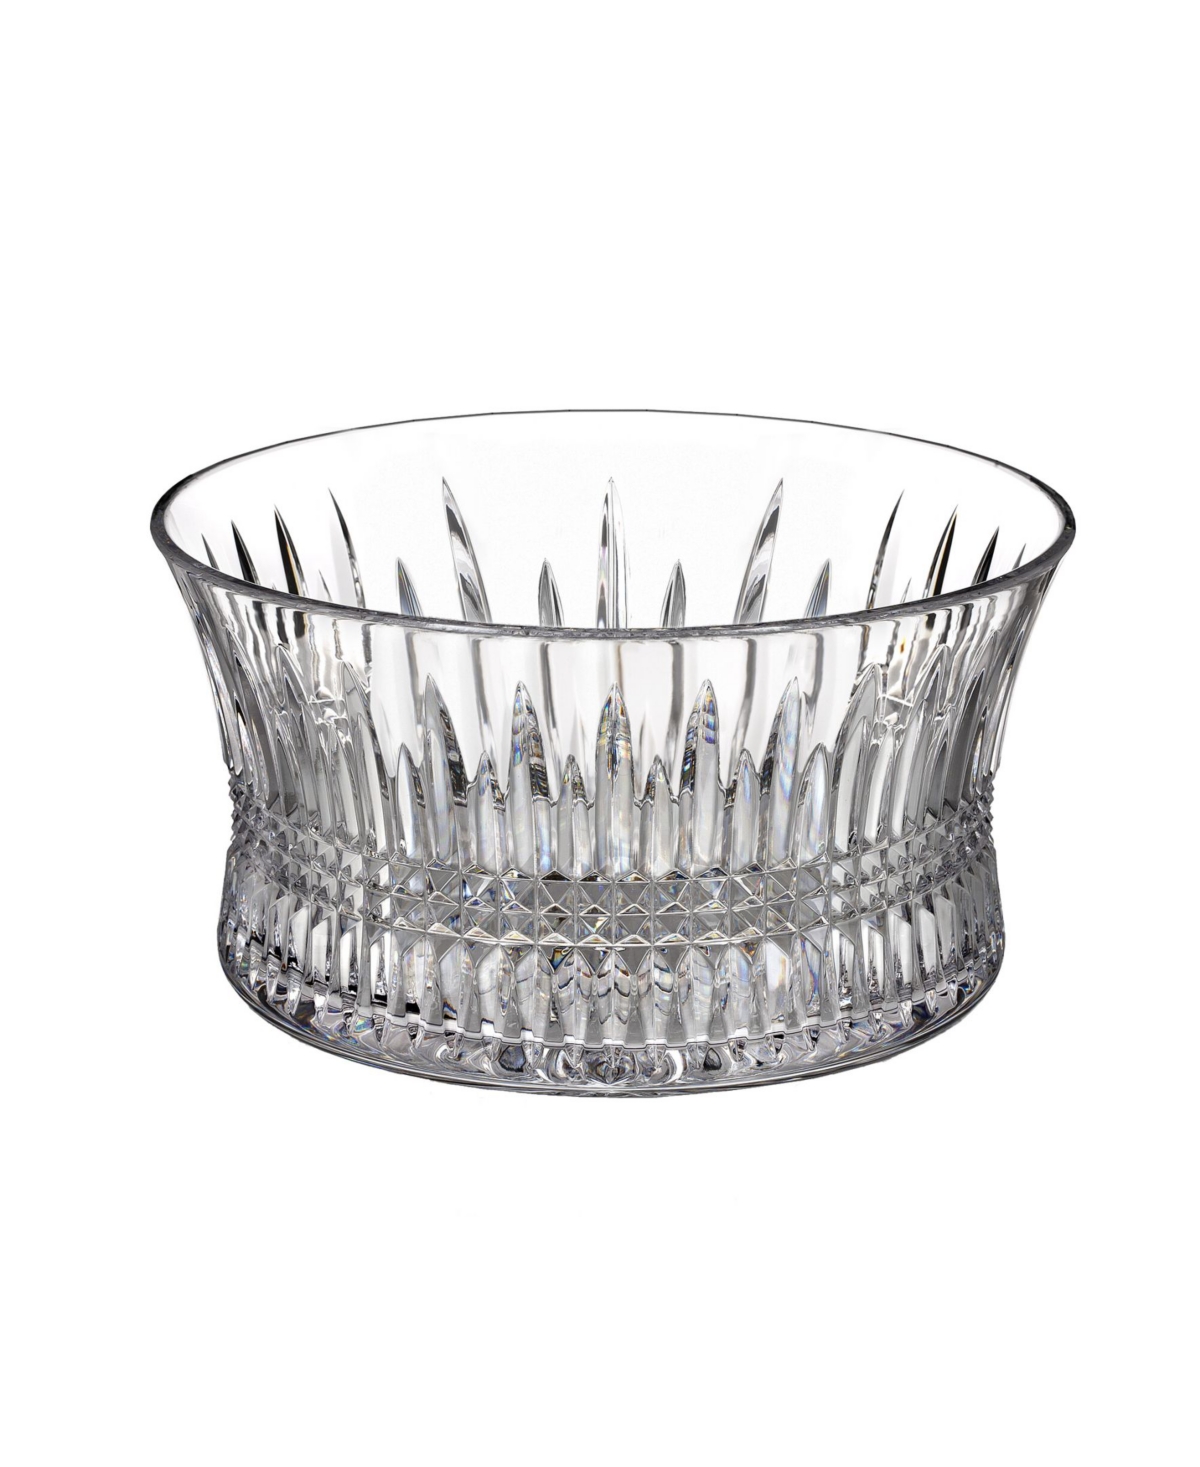 Waterford Lismore Diamond Bowl, 10" In Clear